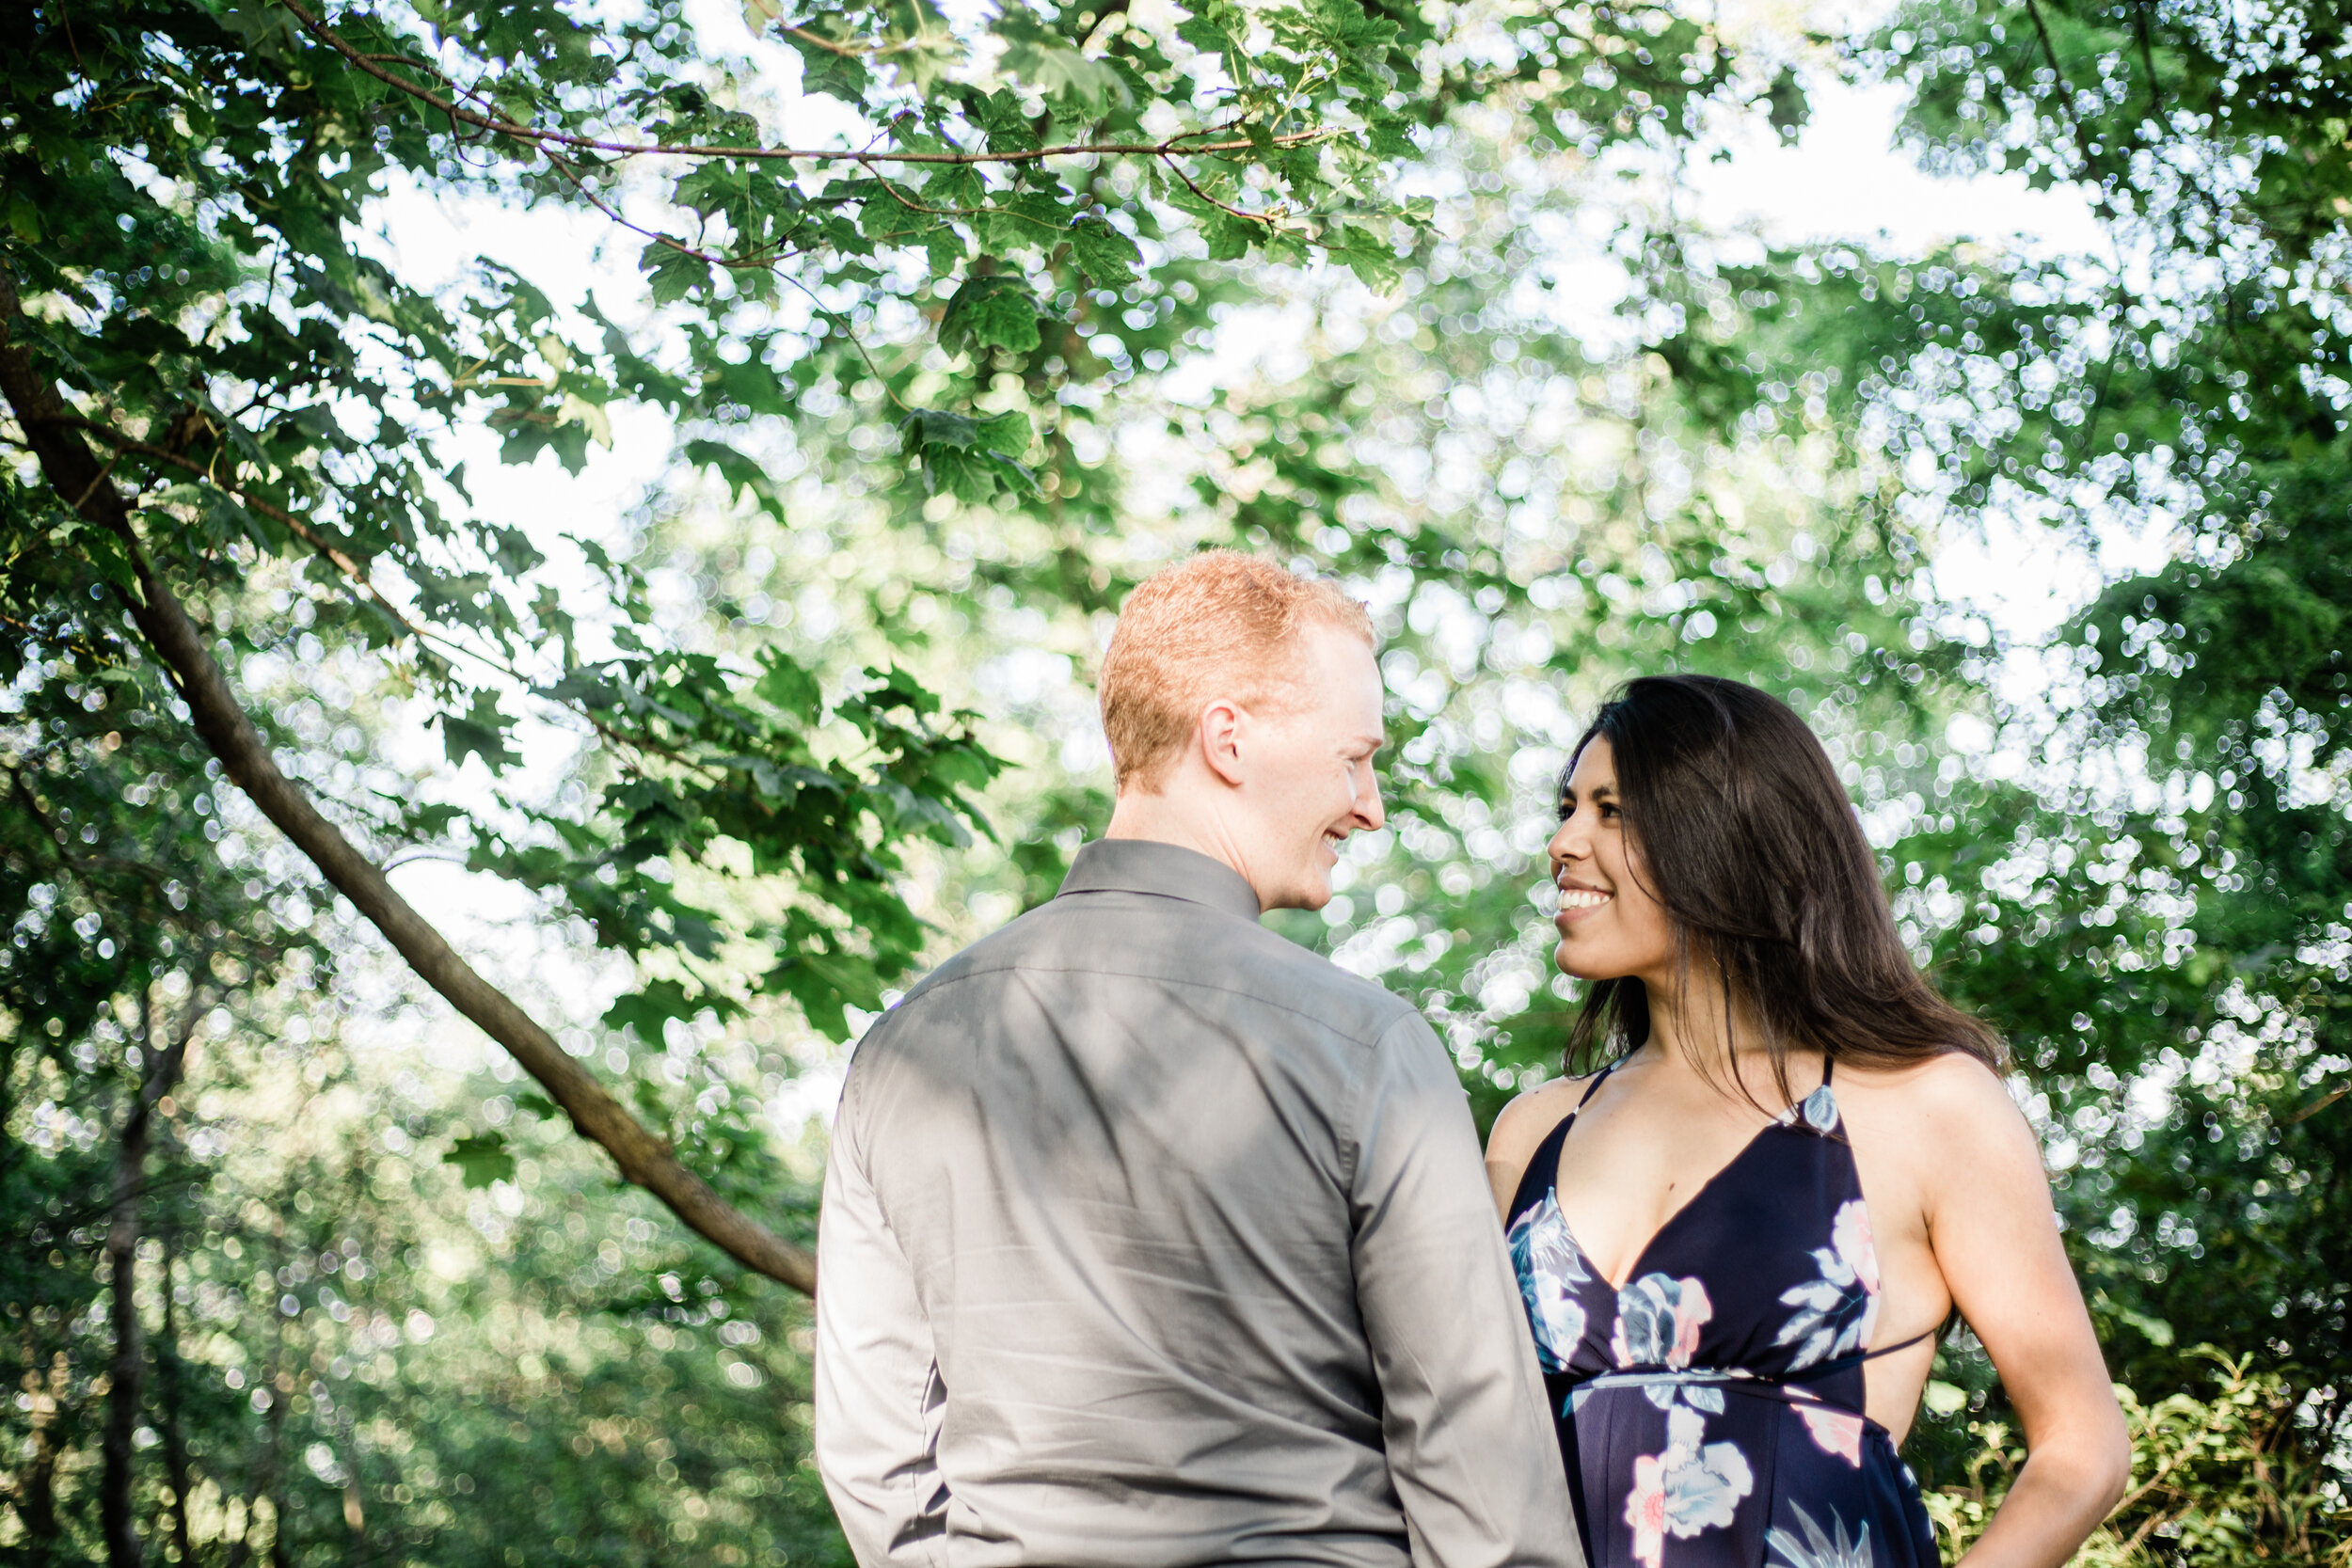 Engagement Session at High Rock Mountain in Western Maryland by Megapixels Media Photography best husband and wife wedding photographers-19.jpg